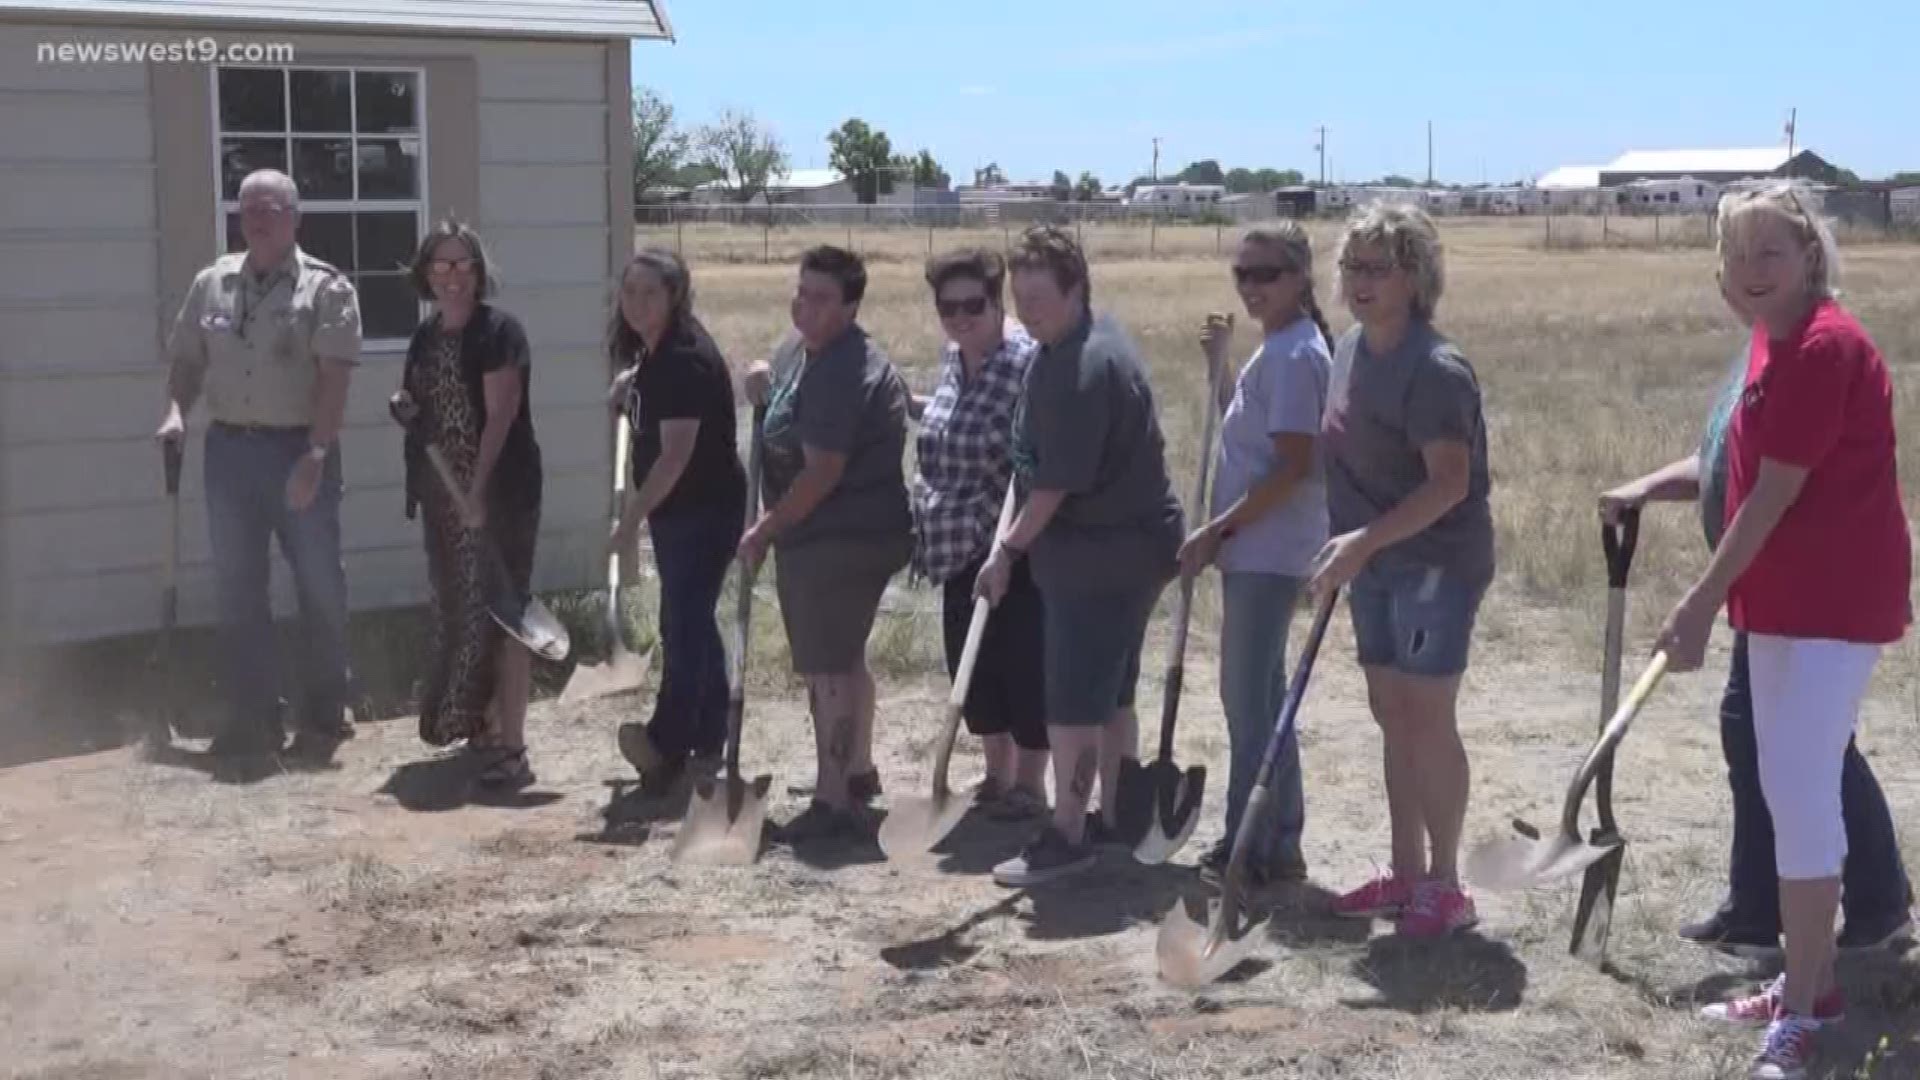 The property in Gardendale was donated to Dog Rescue R Us, and Eagle Scout hopefuls are helping build the facility.